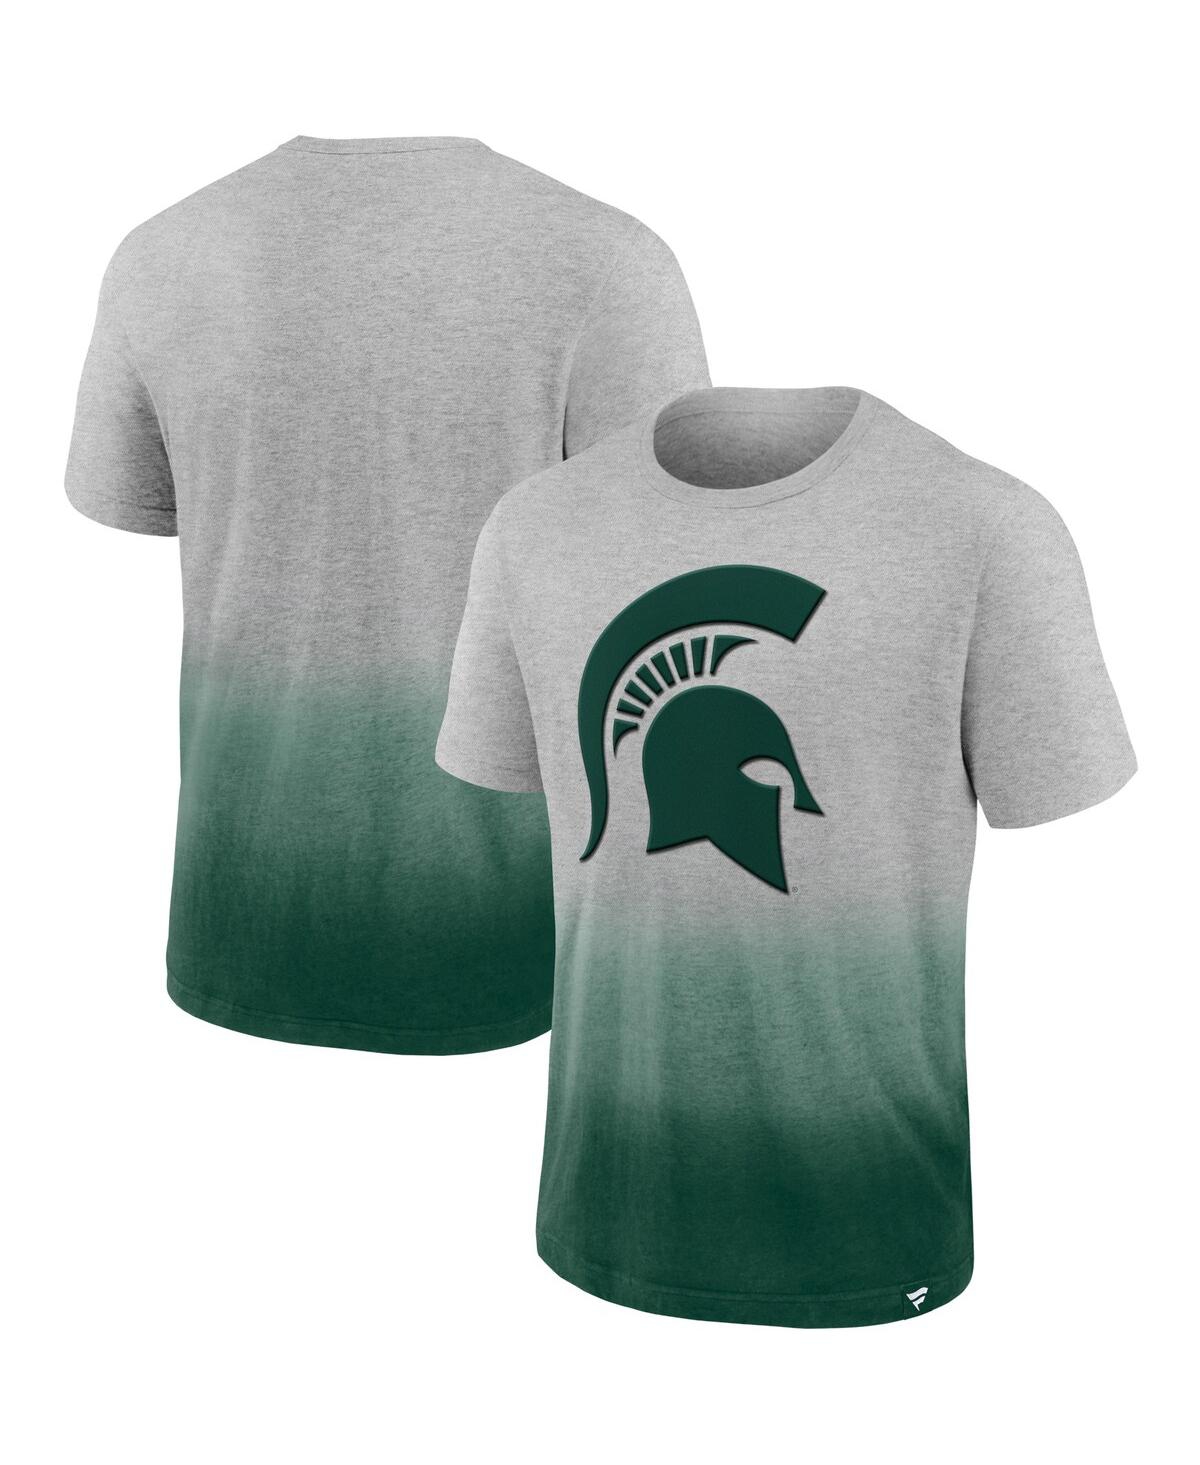 Fanatics Men's  Heathered Gray, Green Michigan State Spartans Team Ombre T-shirt In Heathered Gray,green